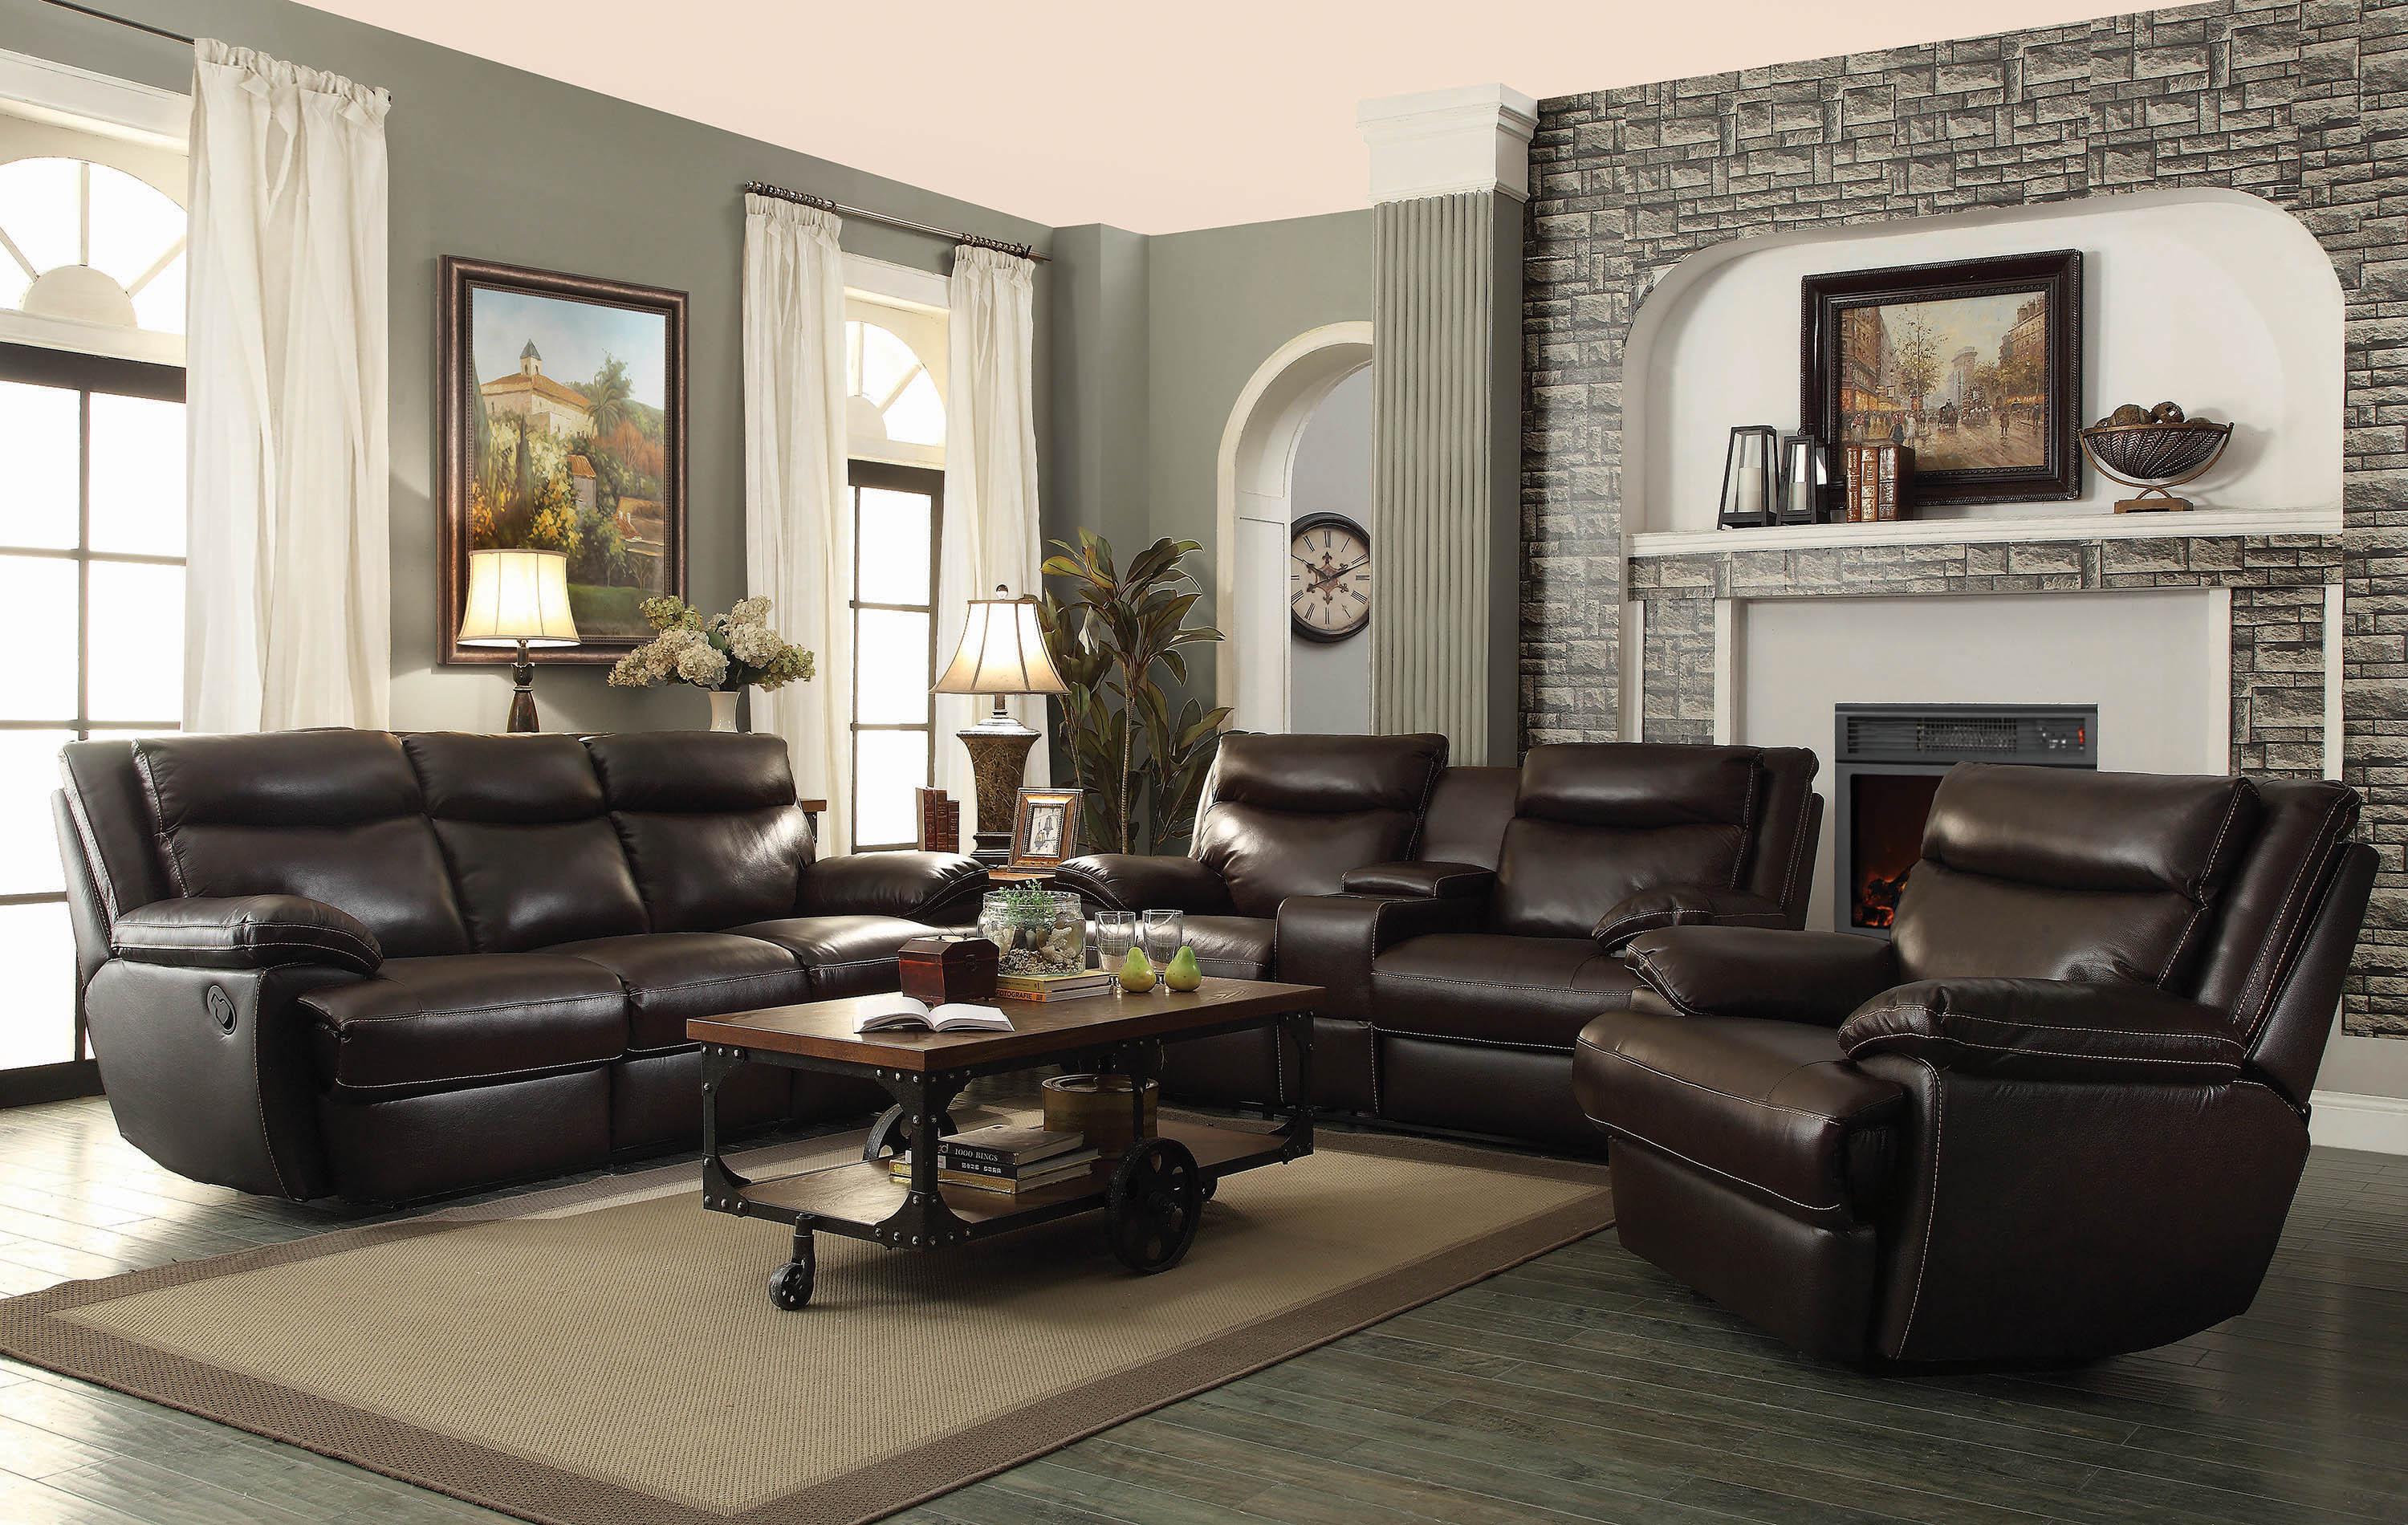 

    
Transitional Brown Leather Upholstery Glider recliner Macpherson by Coaster
